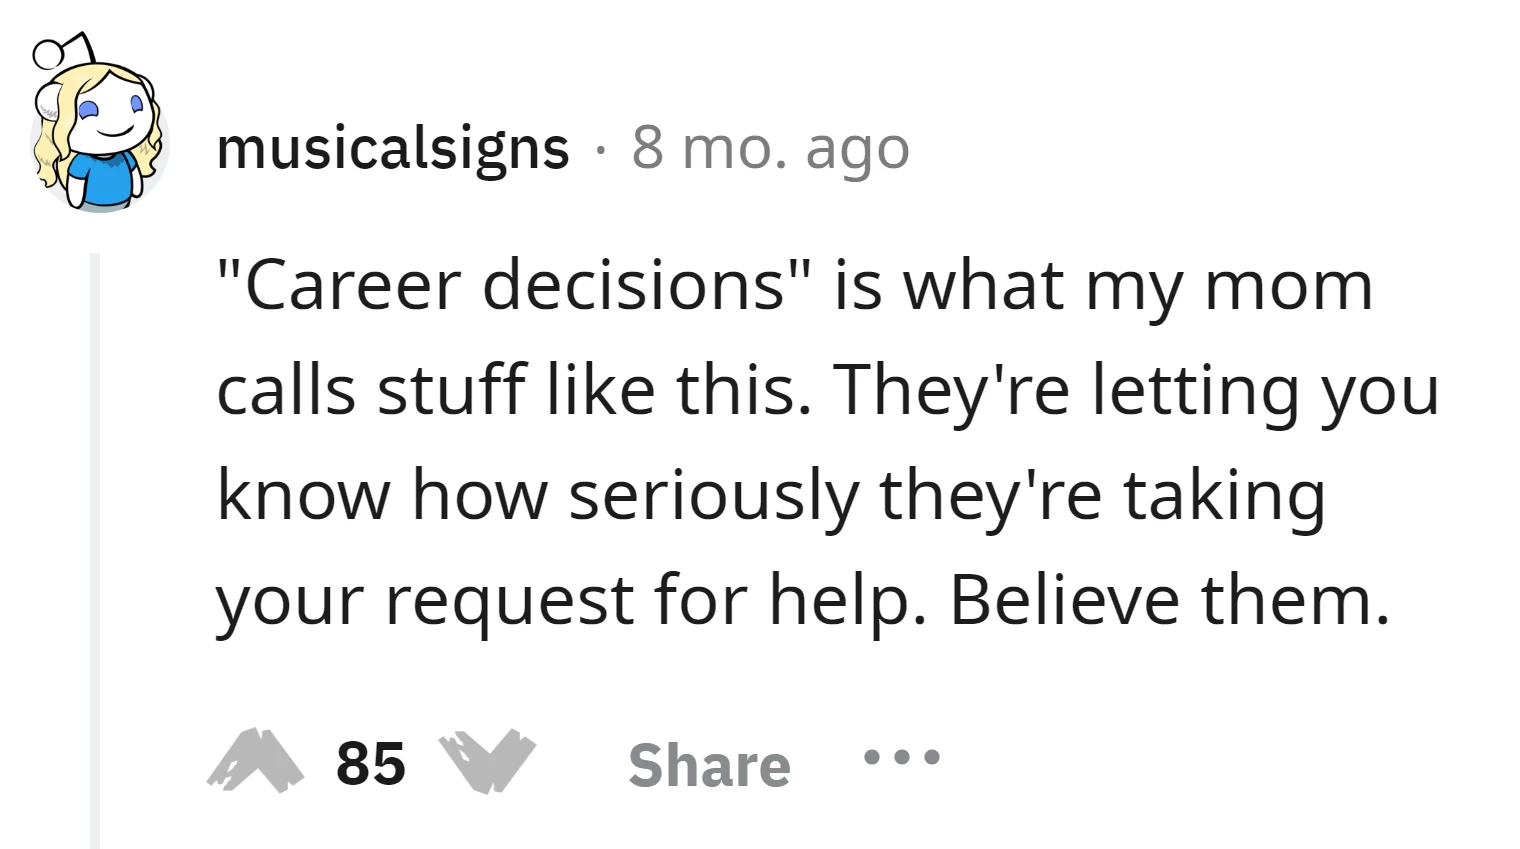 "Career decisions"